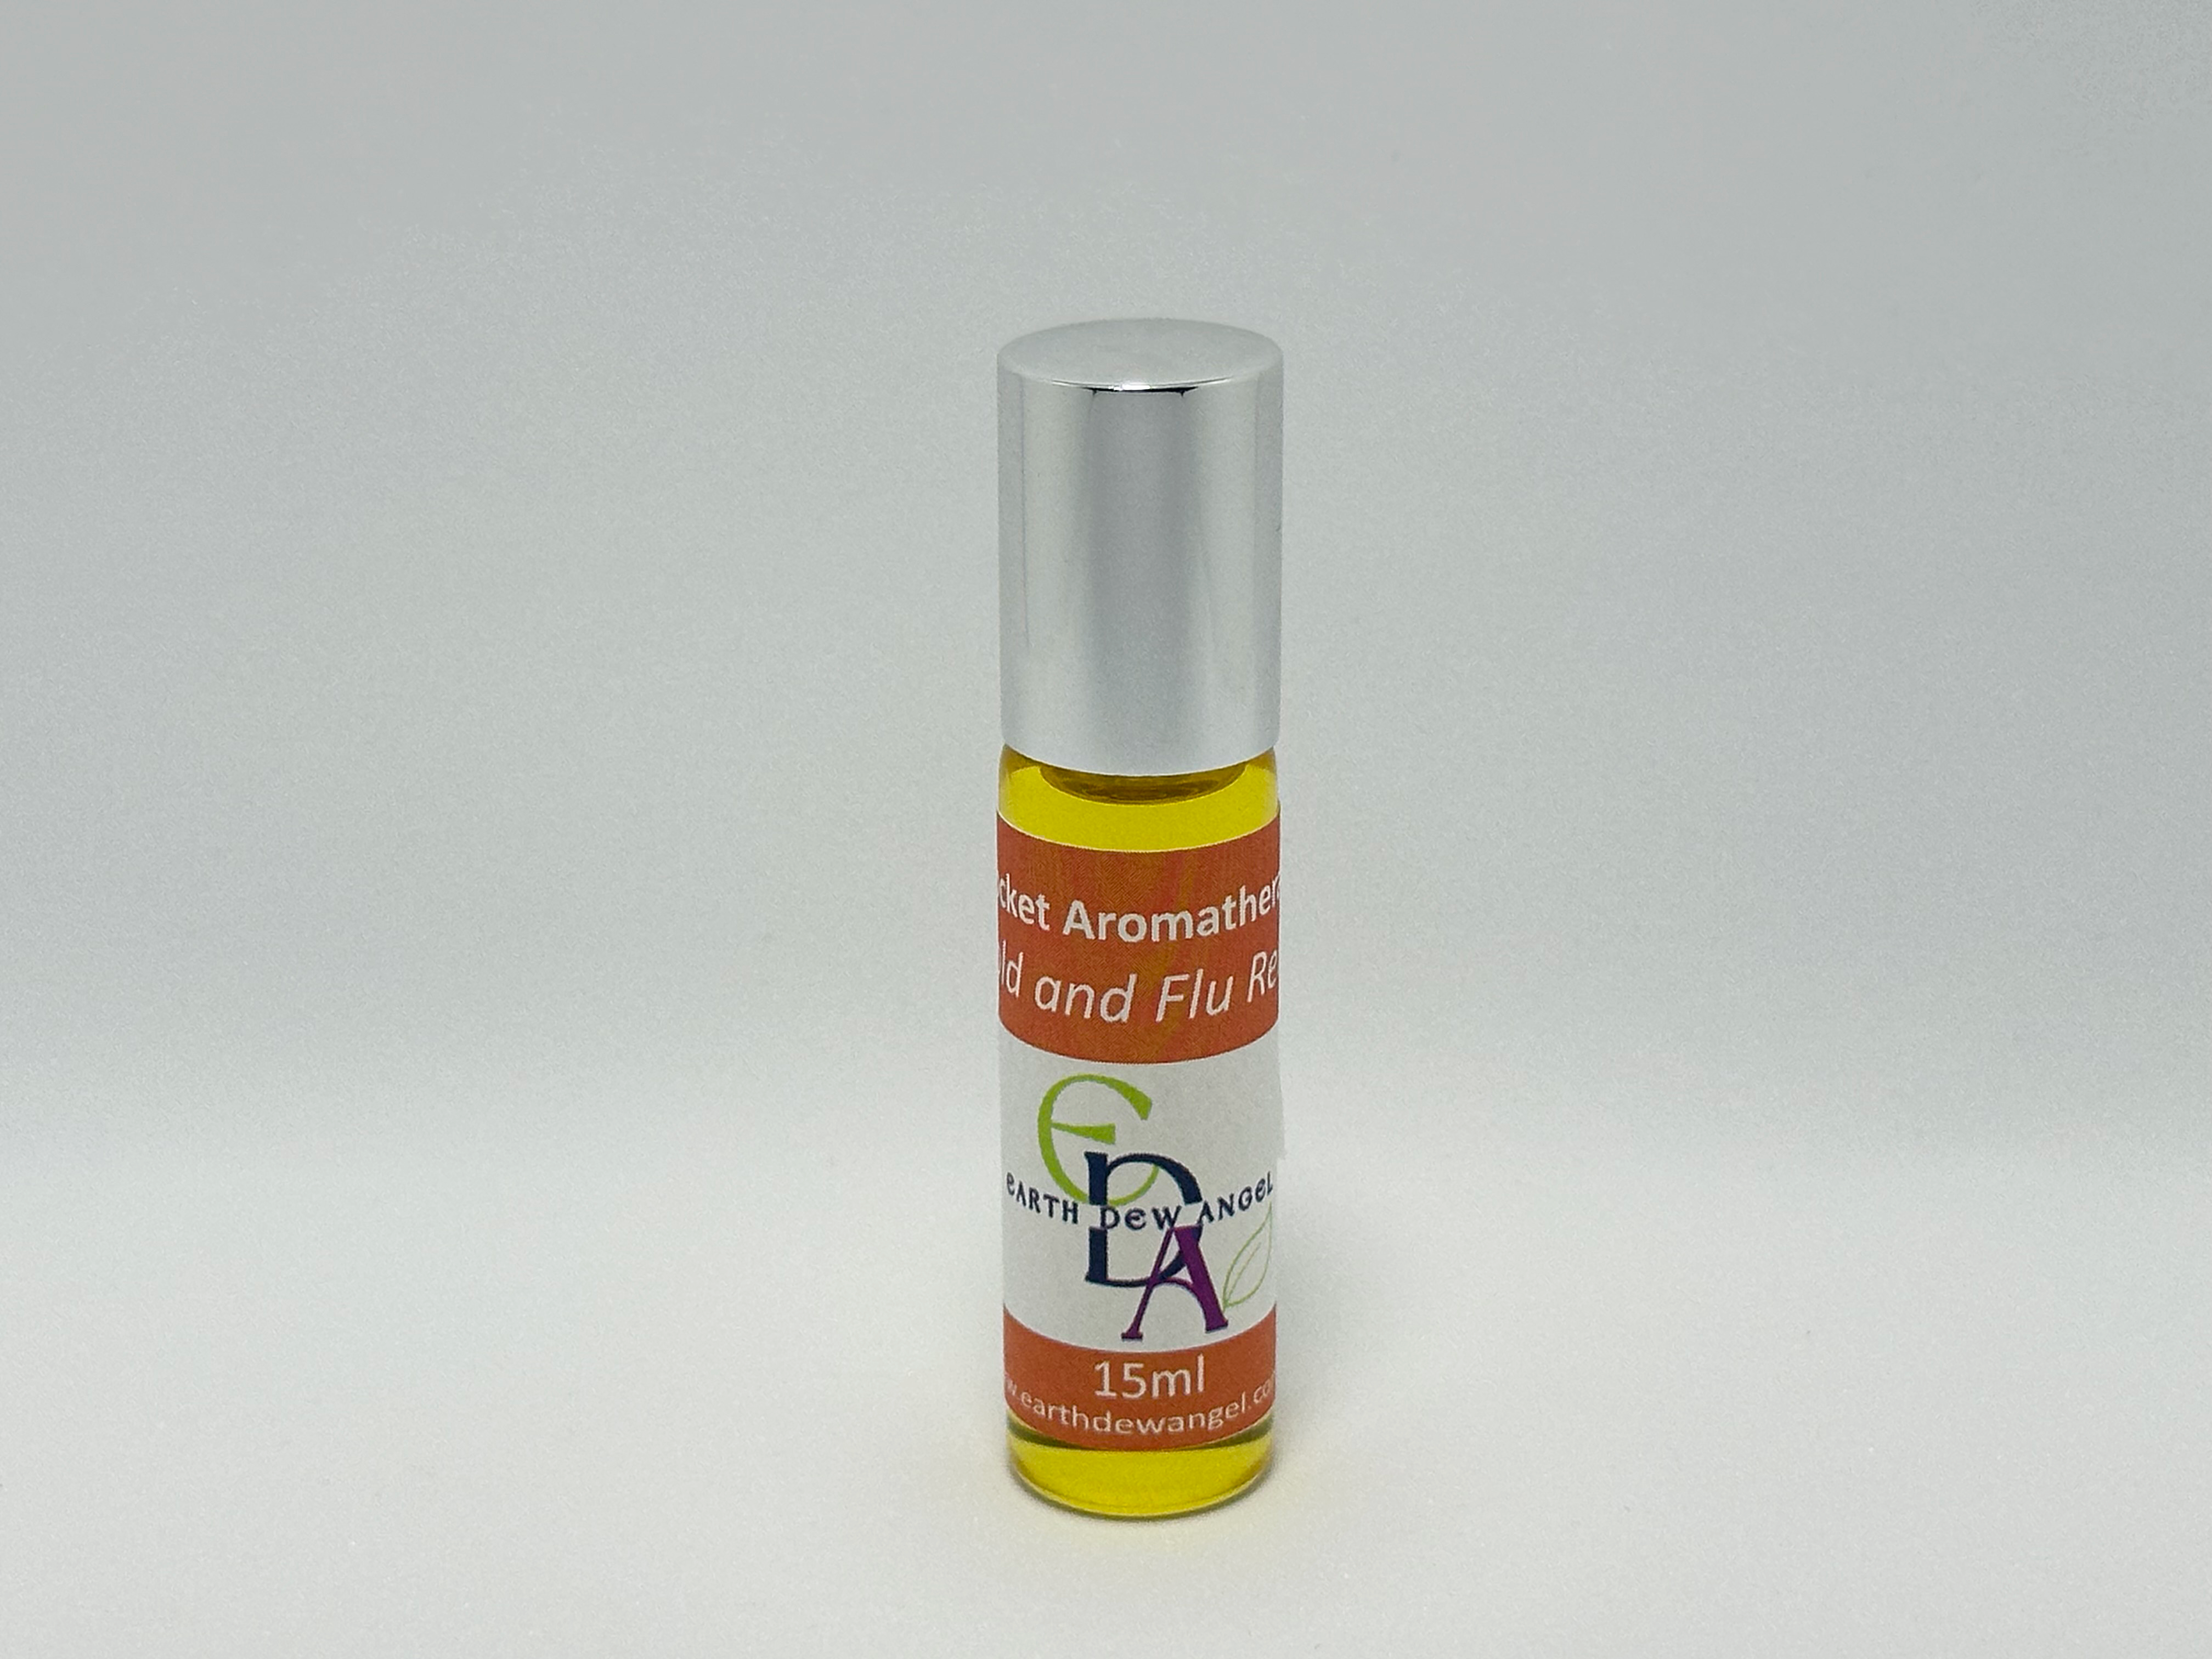 Cold and Flu Relief Pocket Aromatherapy